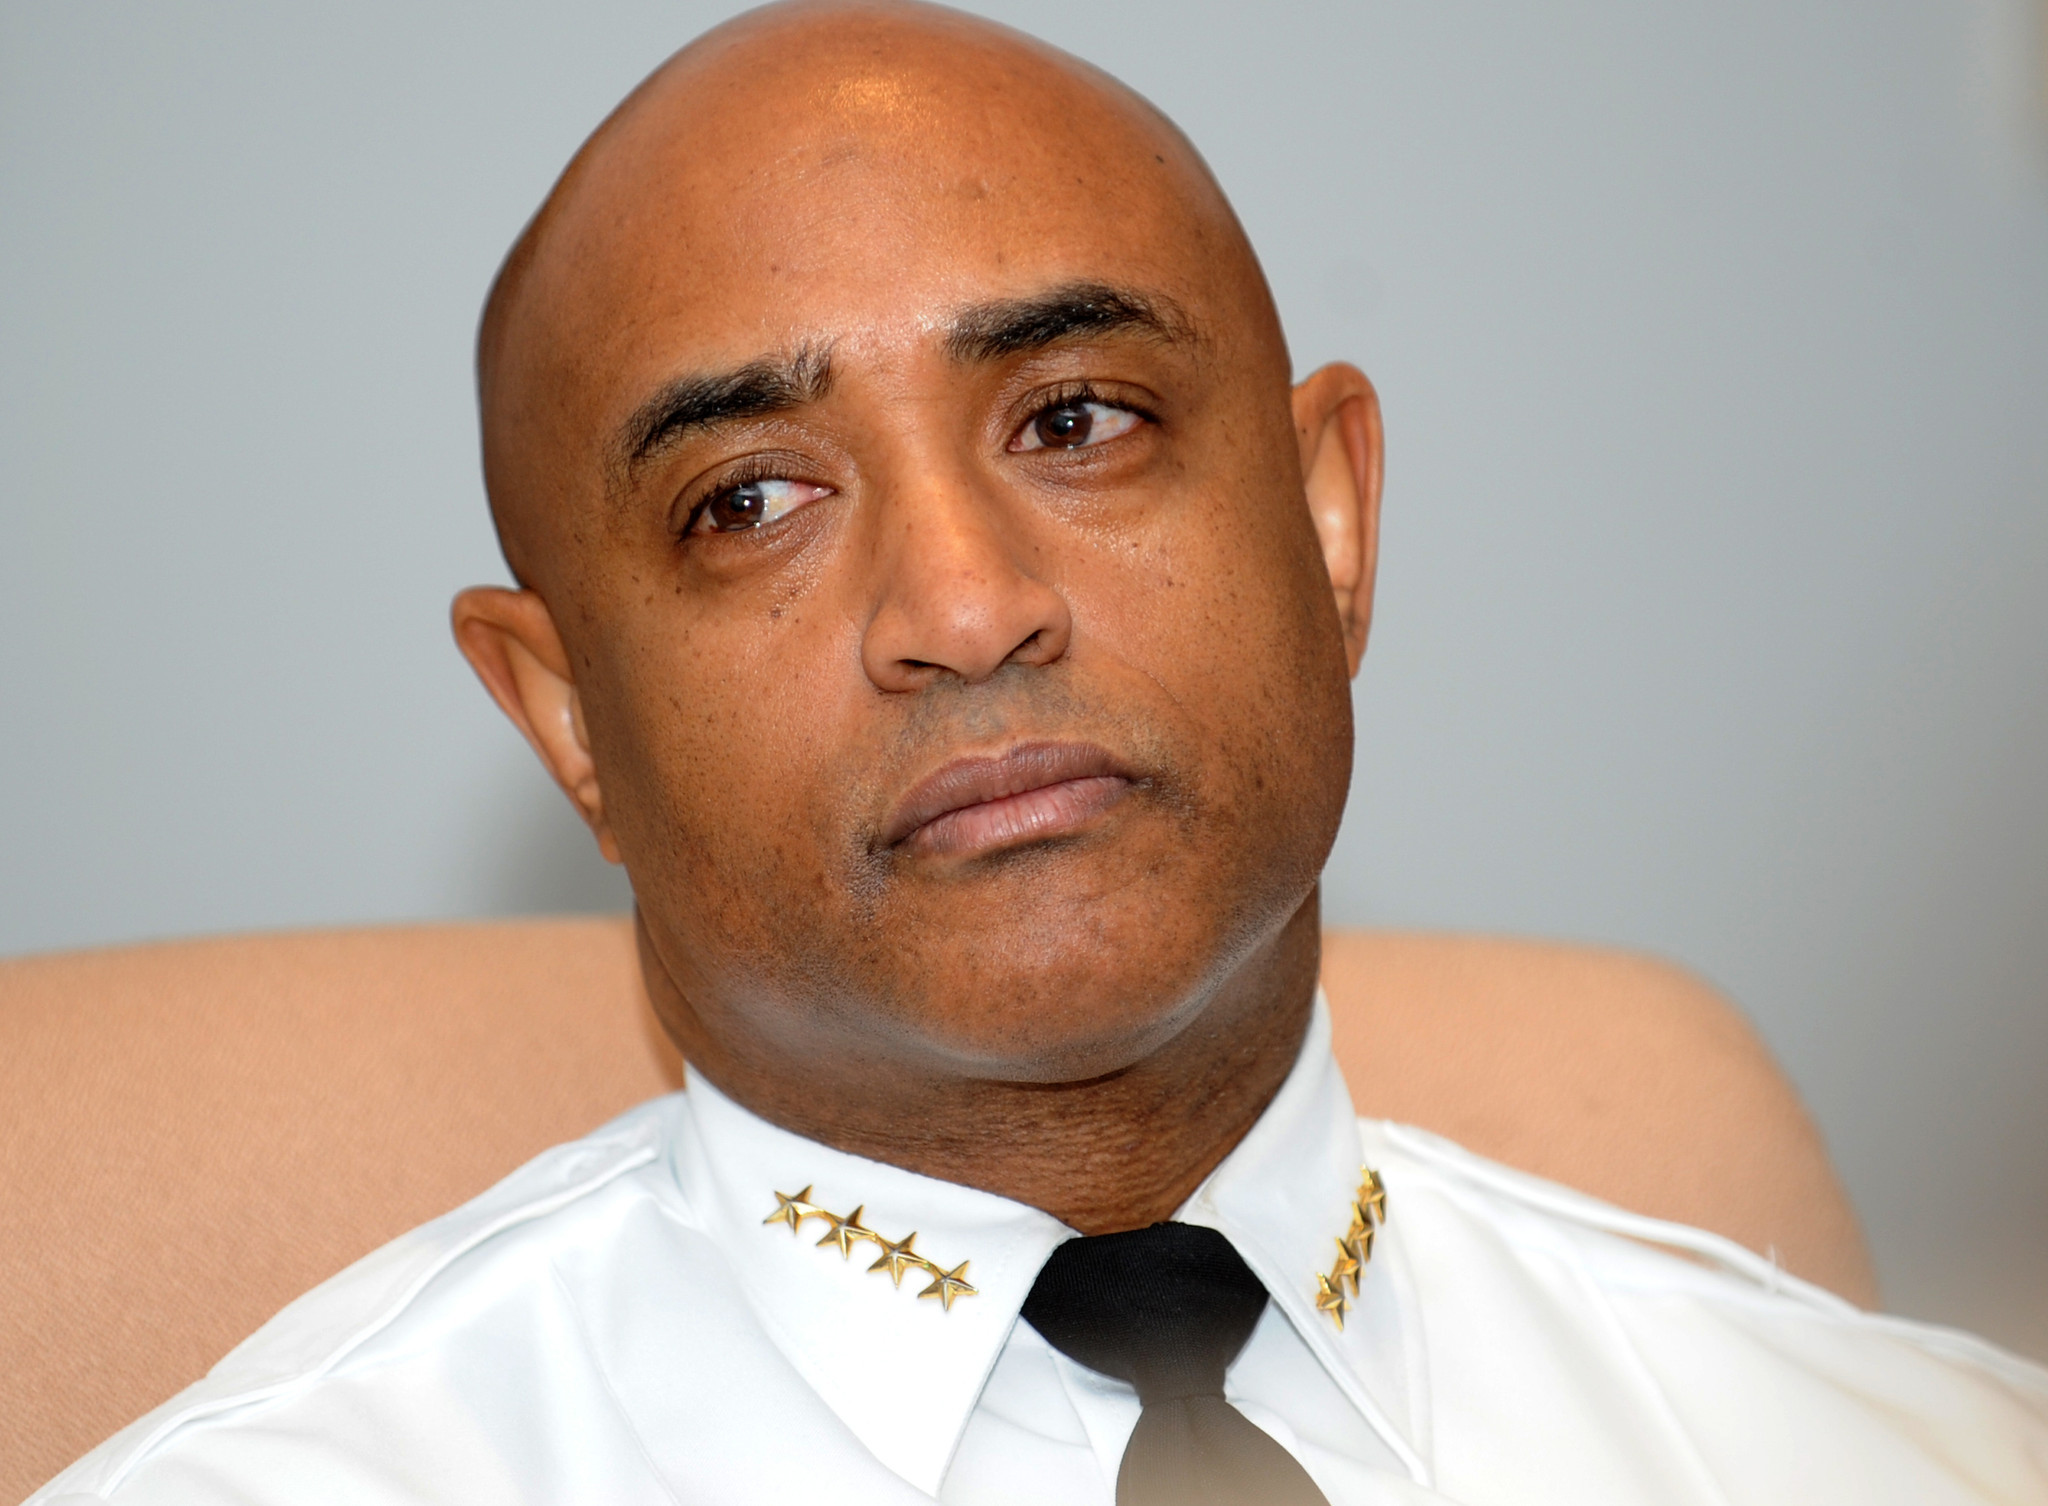 Police Commissioner Batts says police need to tackle racism to build trust